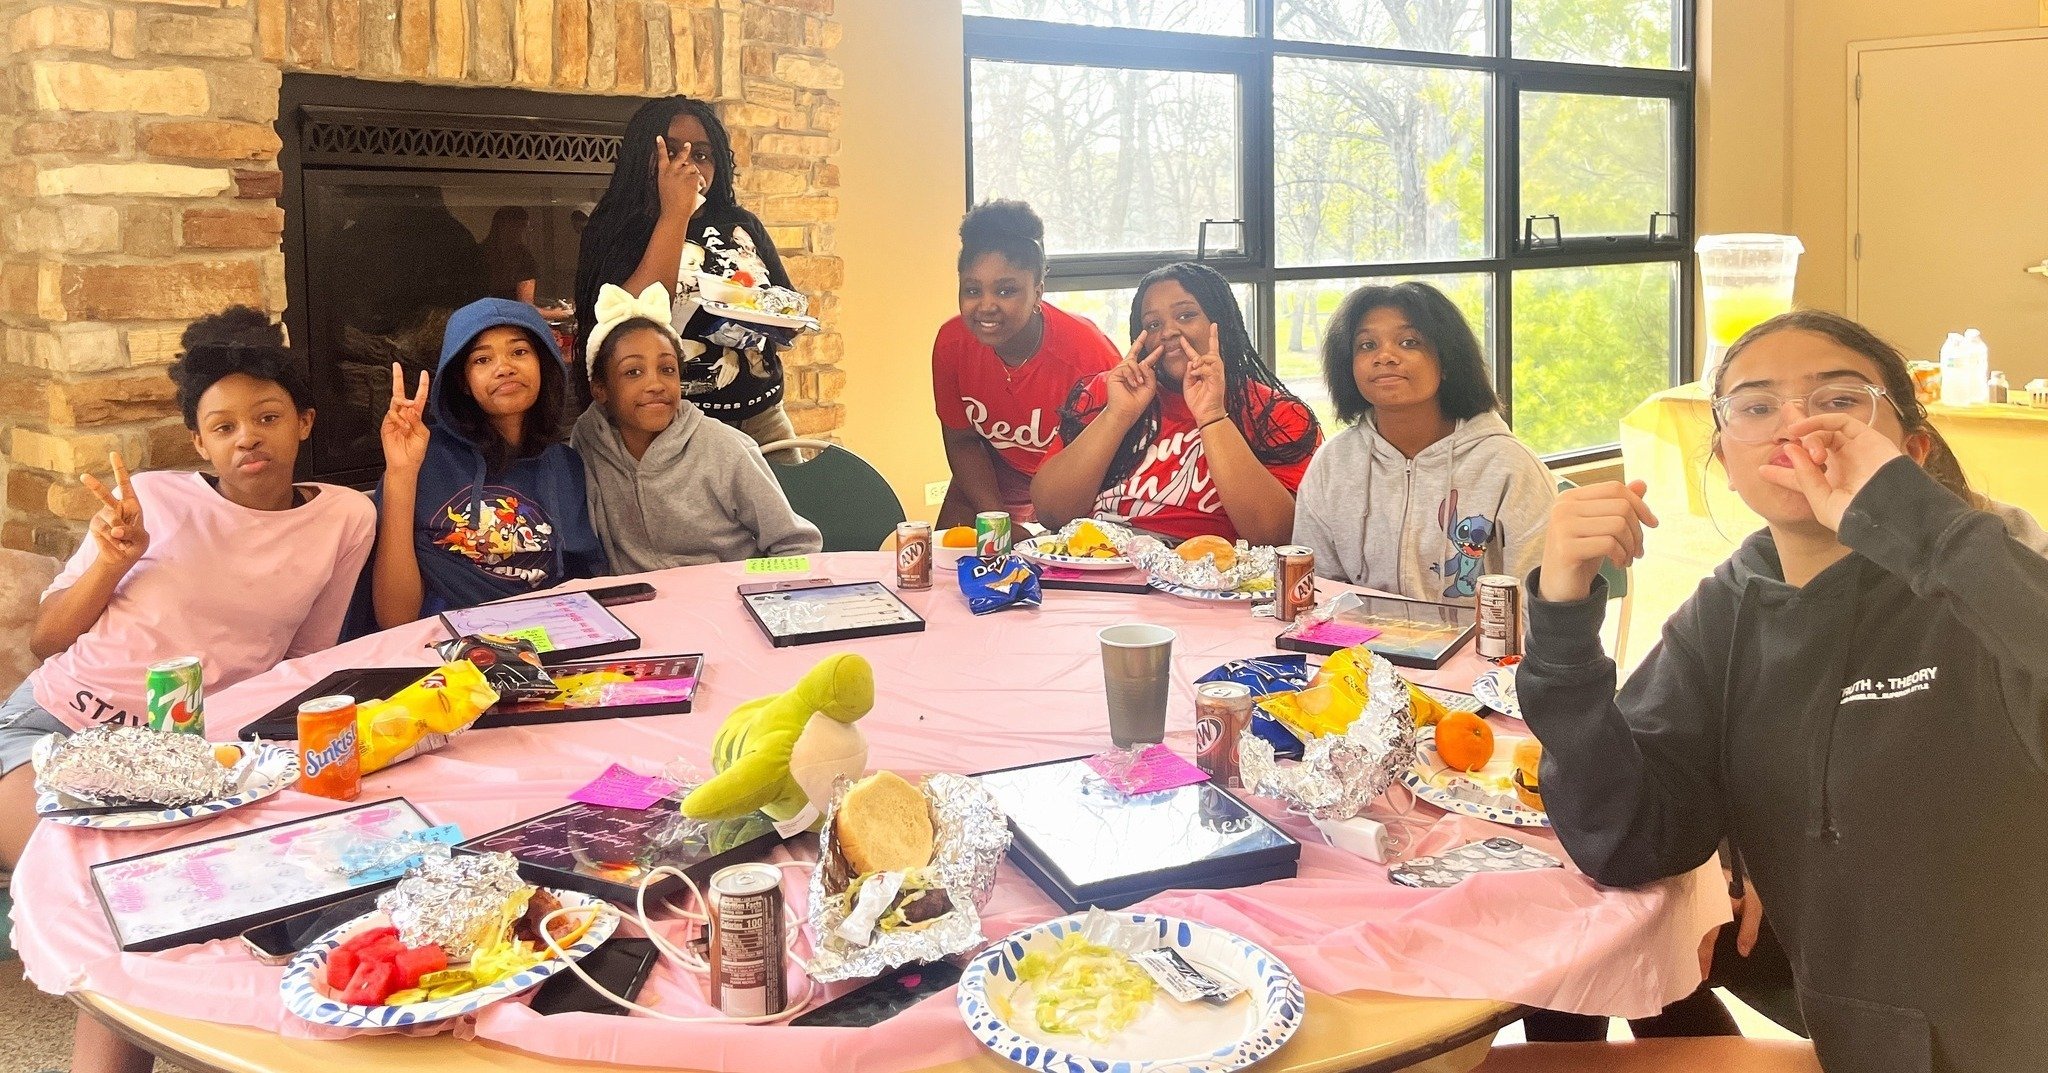 Our TNT Girls Spring Retreat was themed &quot;Daughter of the King&quot;. It was based upon the story of Queen Esther who went from being an orphan to a queen, all because she was a daughter of GOD! We created an Acrostic, which uses the letters in o